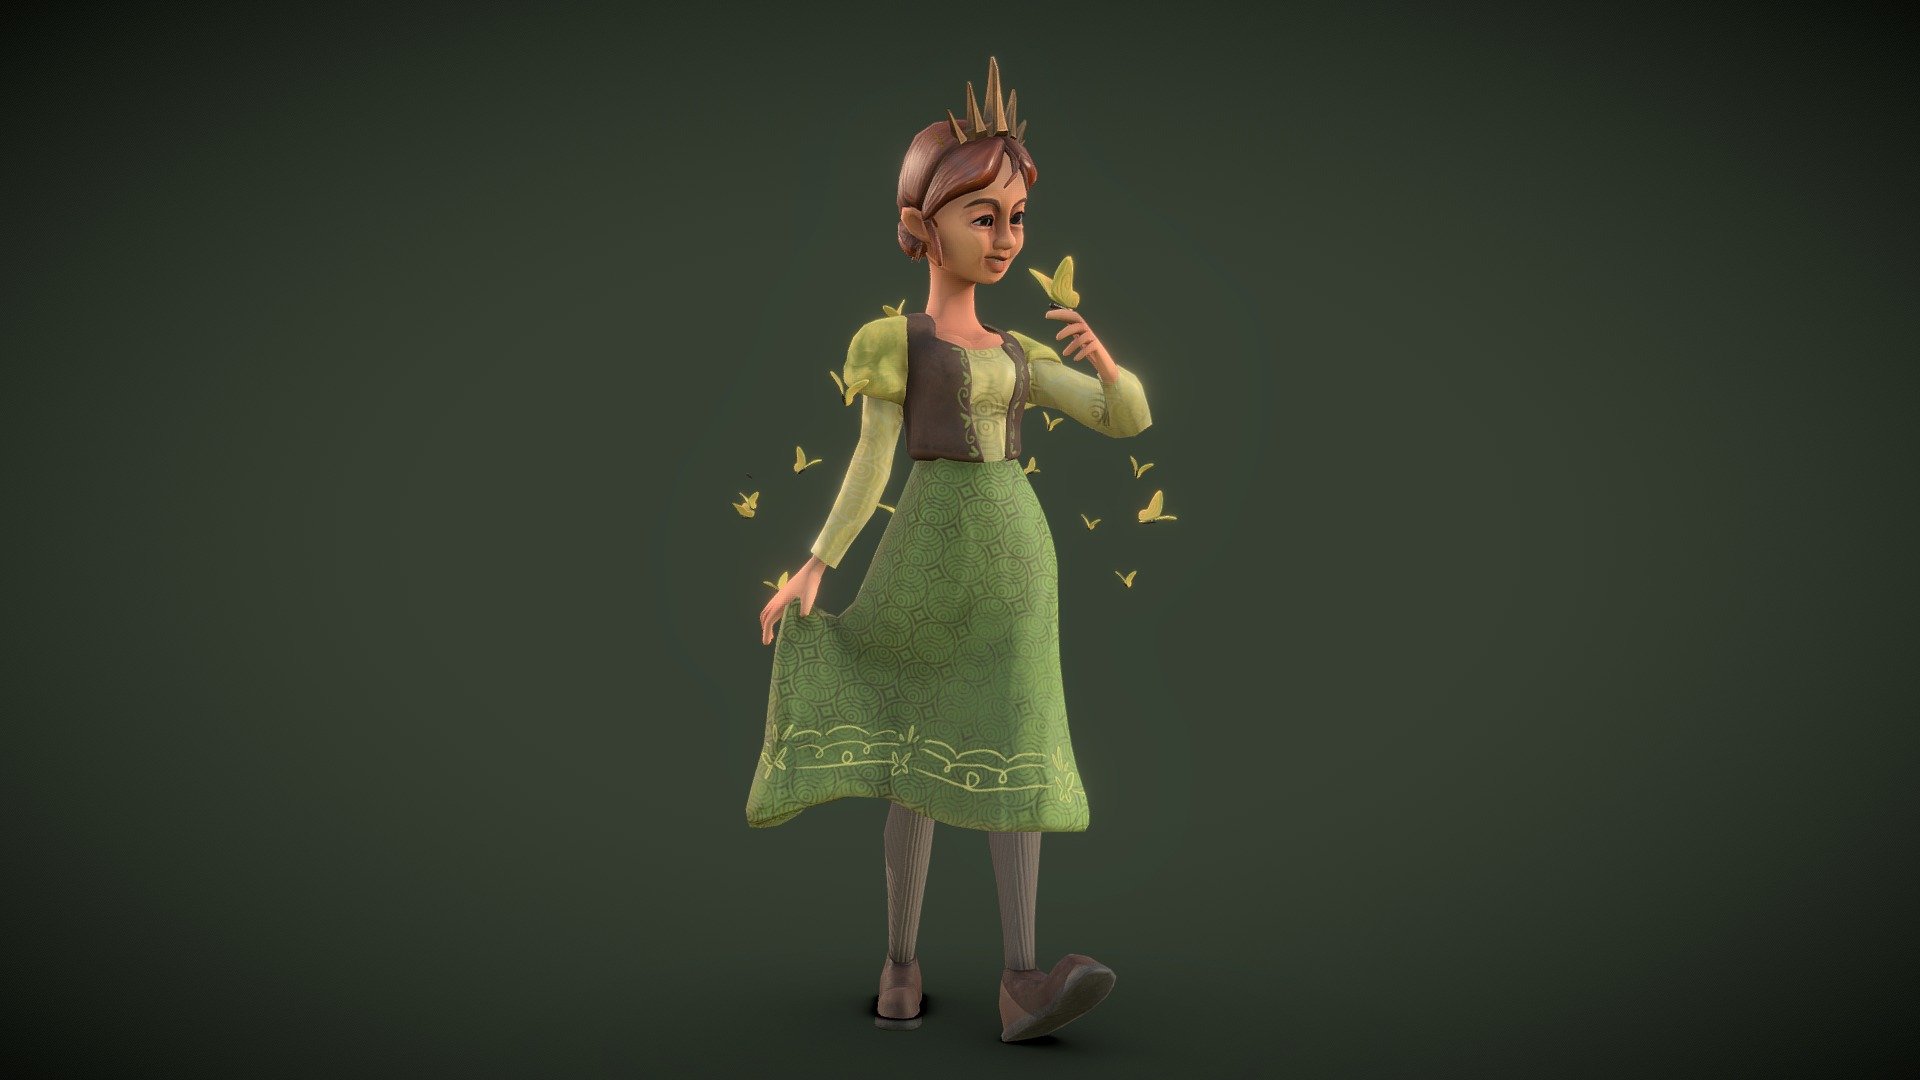 A quick low poly character model. This model was created for a character study project for persons of disabilities. The purpose is to increase ability diversity in the designing process. It is more of a standalone-posed model than it is intended for animated productions. The poly modeling was done in Maya and the textures in Substance Painter. :) - Princess - Download Free 3D model by kand8998 (@KaitlynAndrus) 3d model